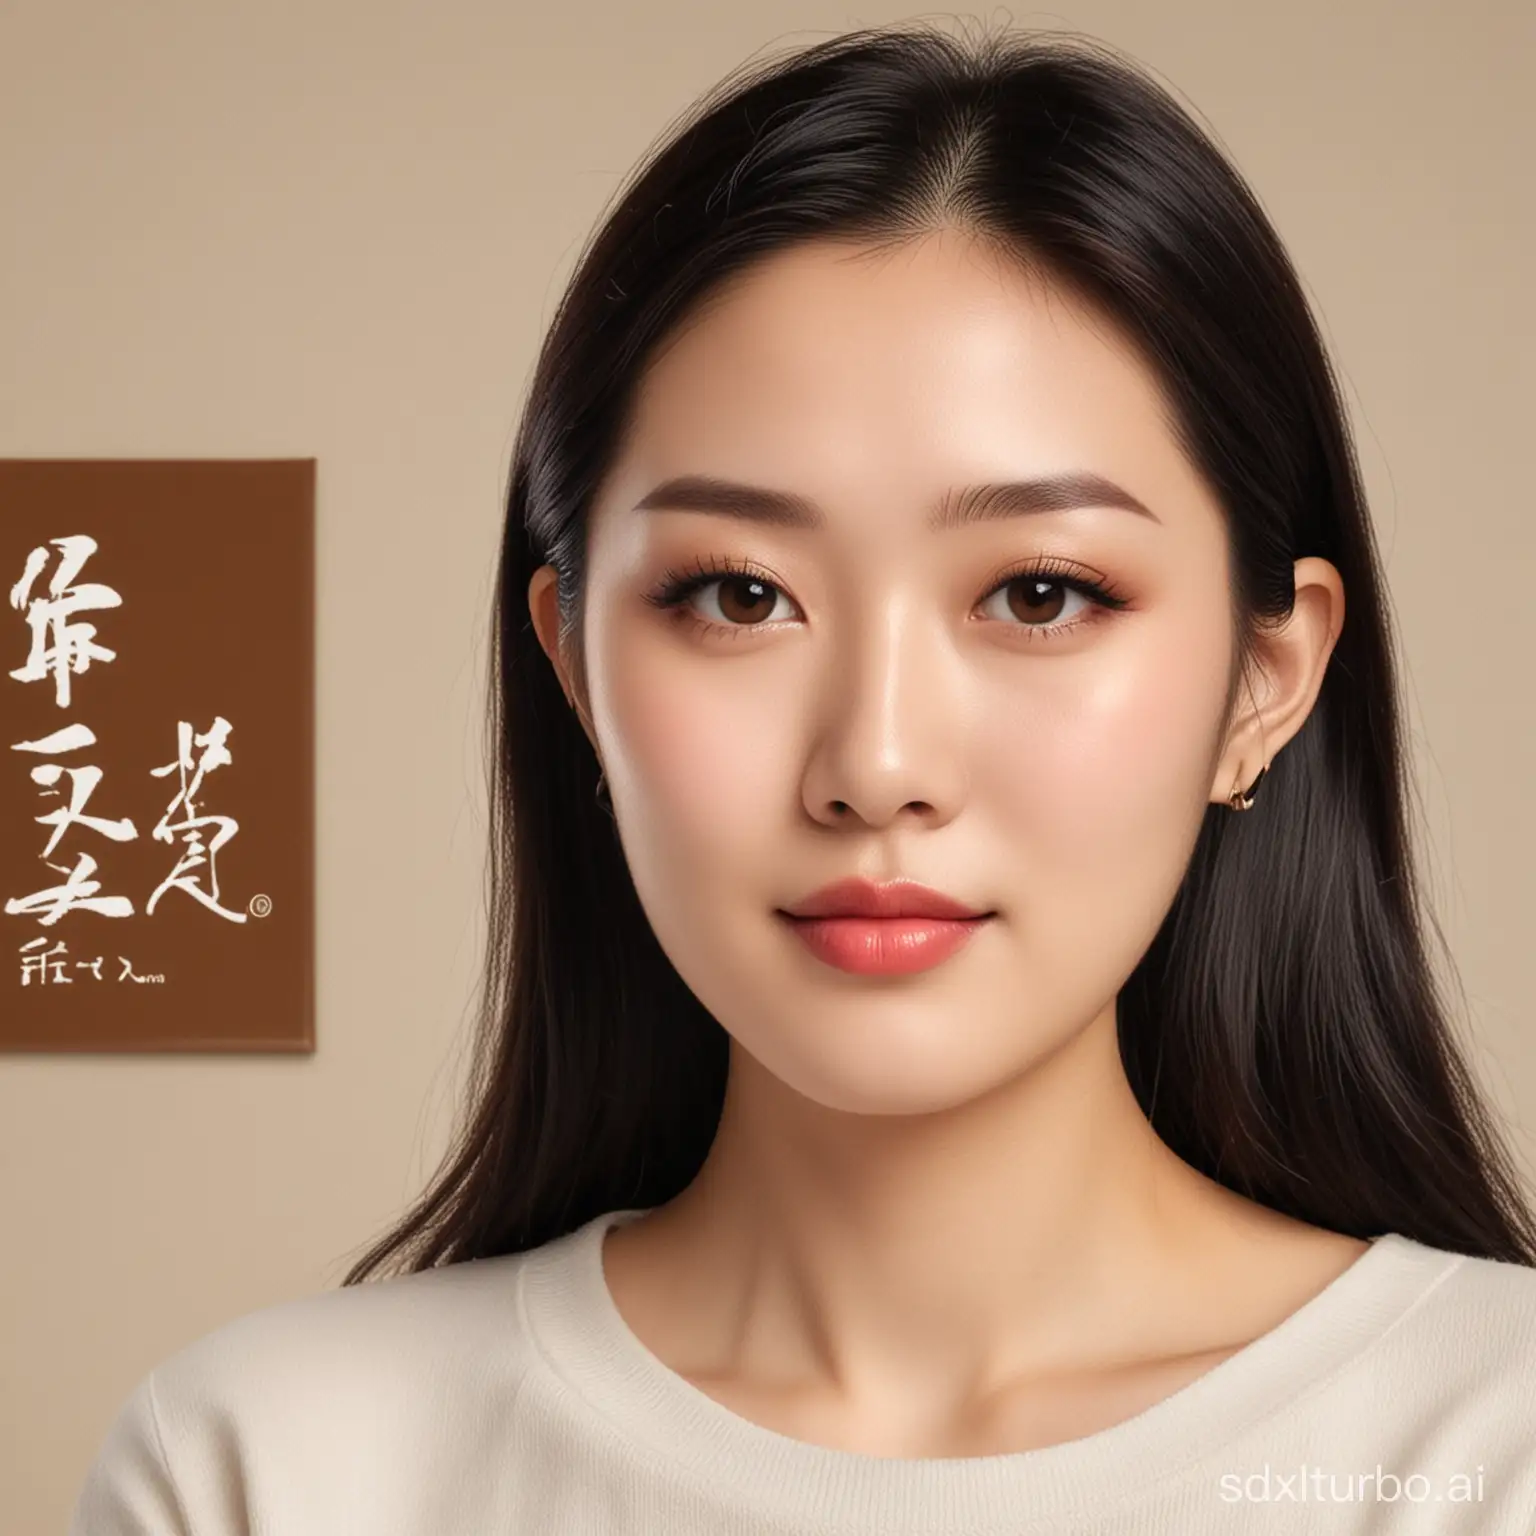 Help me generate a Chinese Asian face of Chinese home department store wholesale, and also have home daily department store products and home department store wholesale banner avatar
